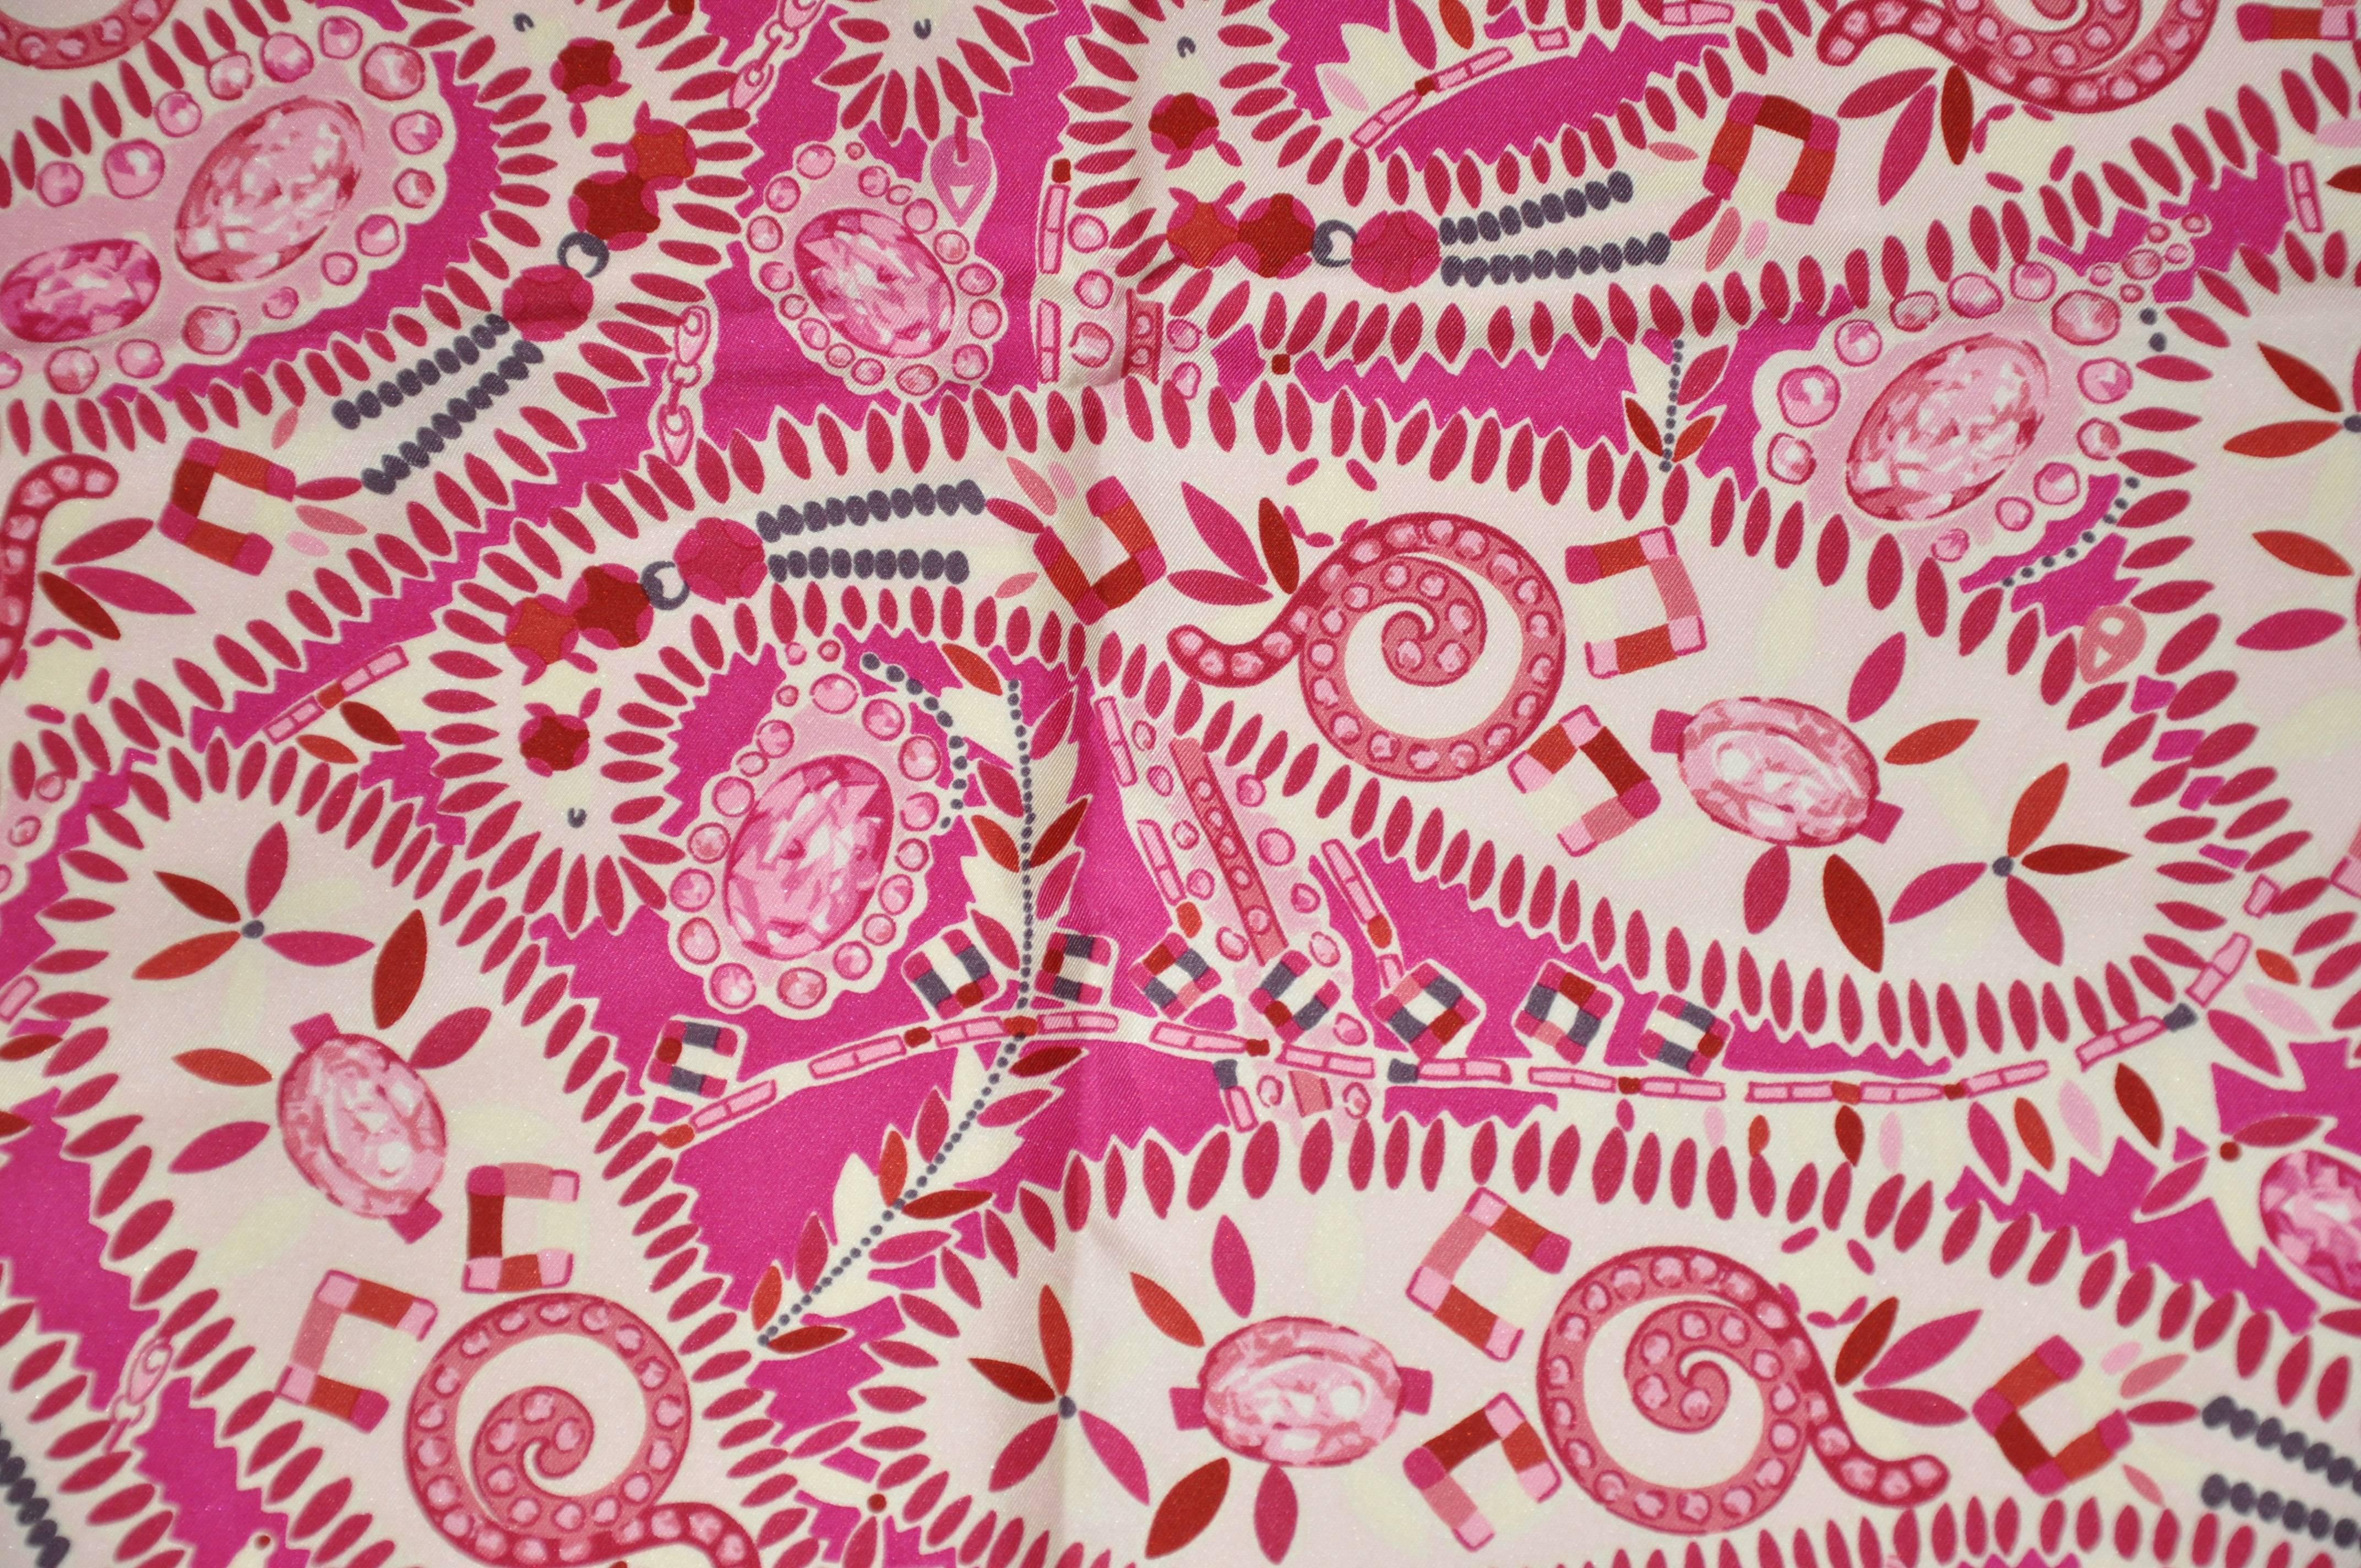         Asprey of London wonderful combination of fuchsia and cream with accents of violet makes for this bold print silk scarf. This wonderful scarf is finished with hand-rolled edges with cream borders. Made in Iatlym it measures 34